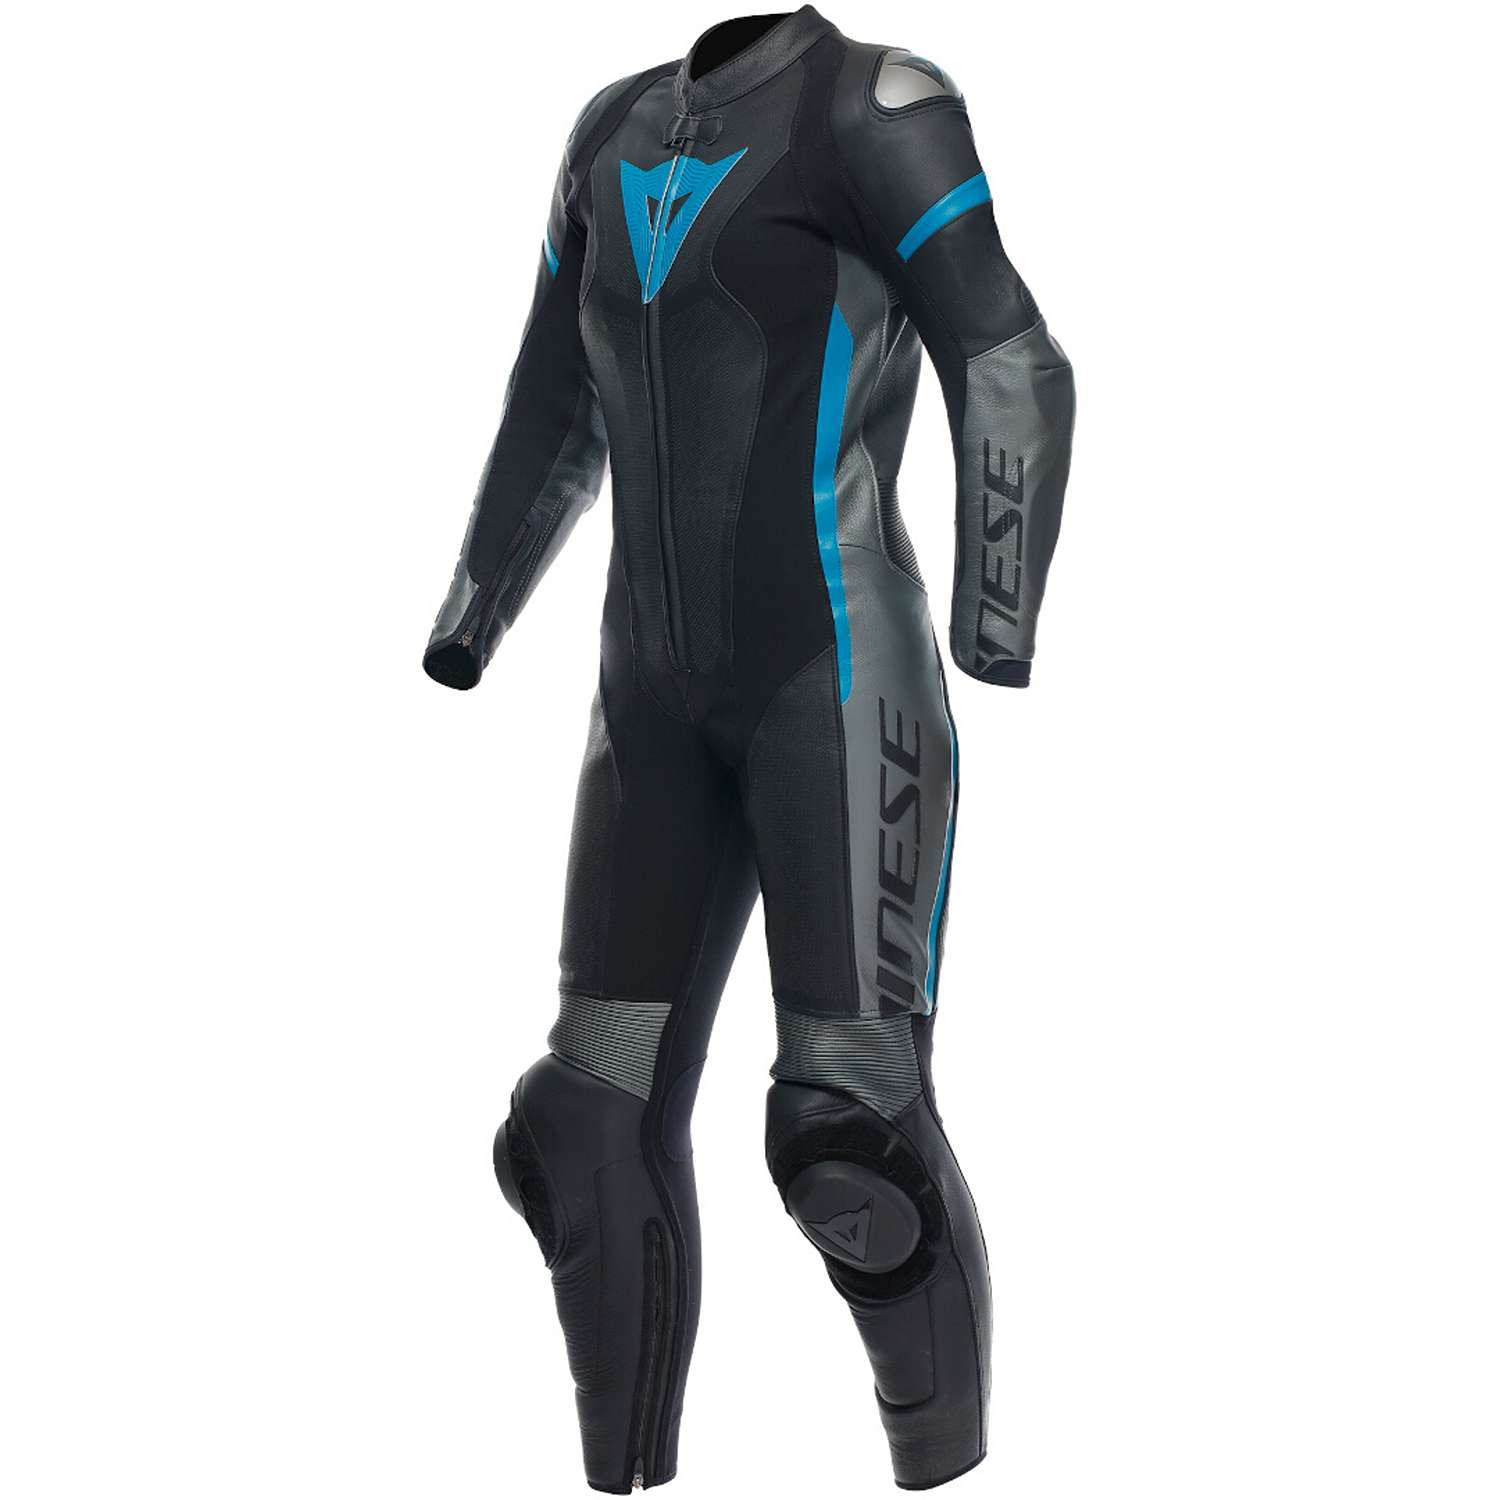 Image of Dainese Grobnik Lady Leather 1Pc Suit Perf Black Anthracite Teal Size 52 ID 8051019498205